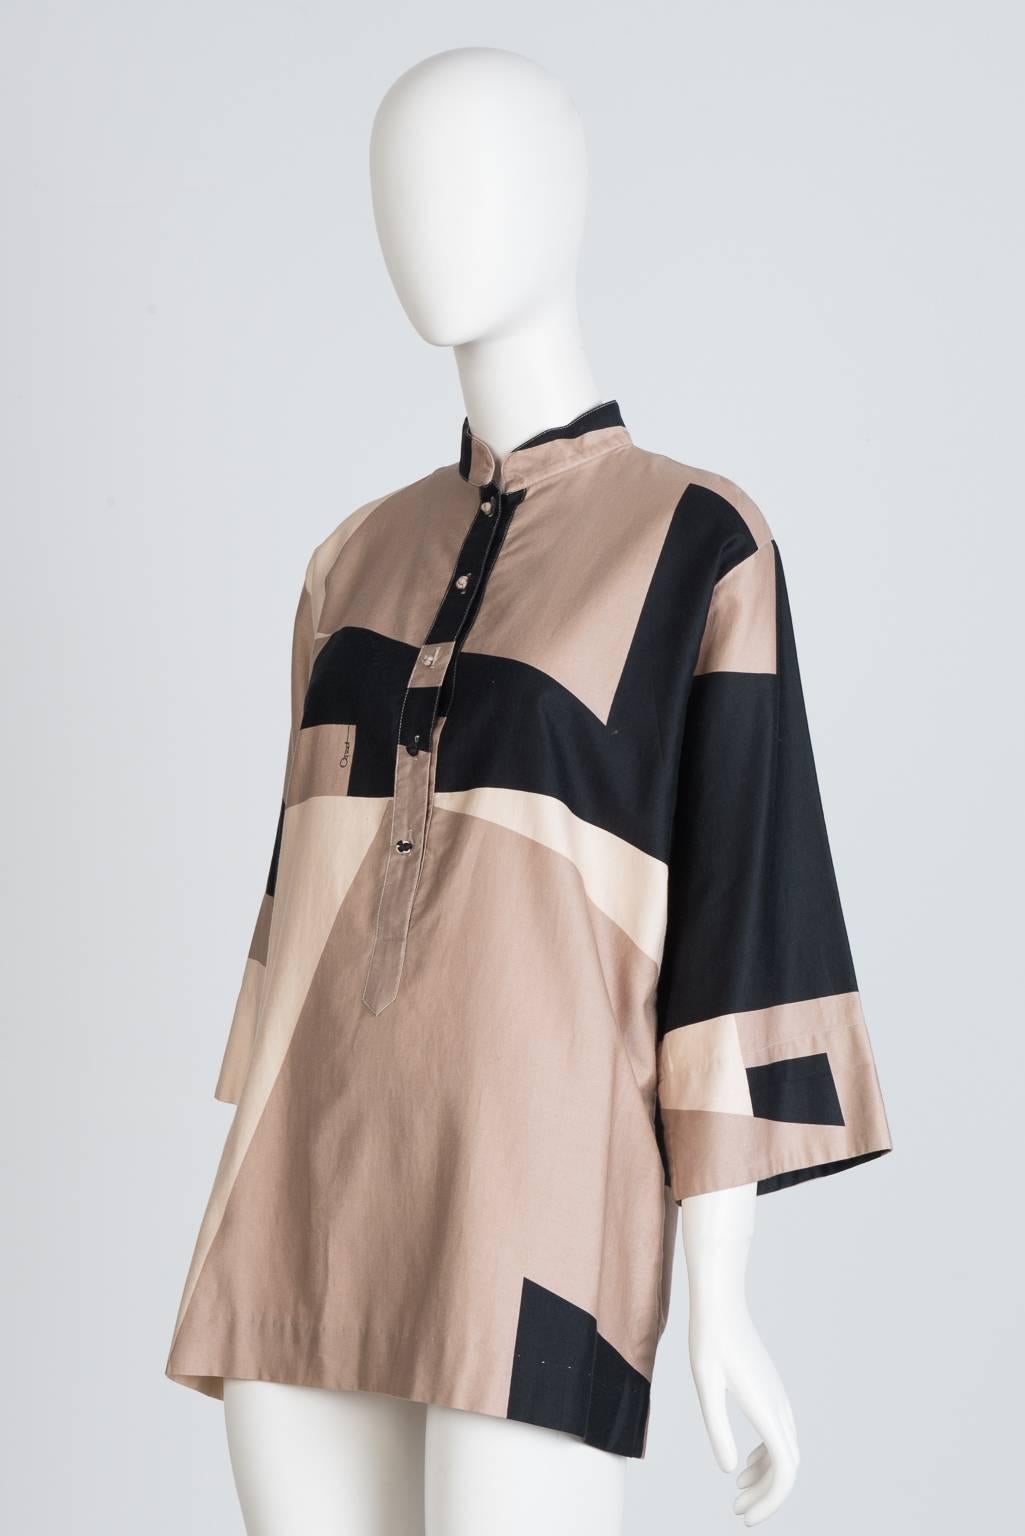 Five button, band collar tunic blouse with 3/4 length sleeves and graphic print; rose  gold, cream, and black.